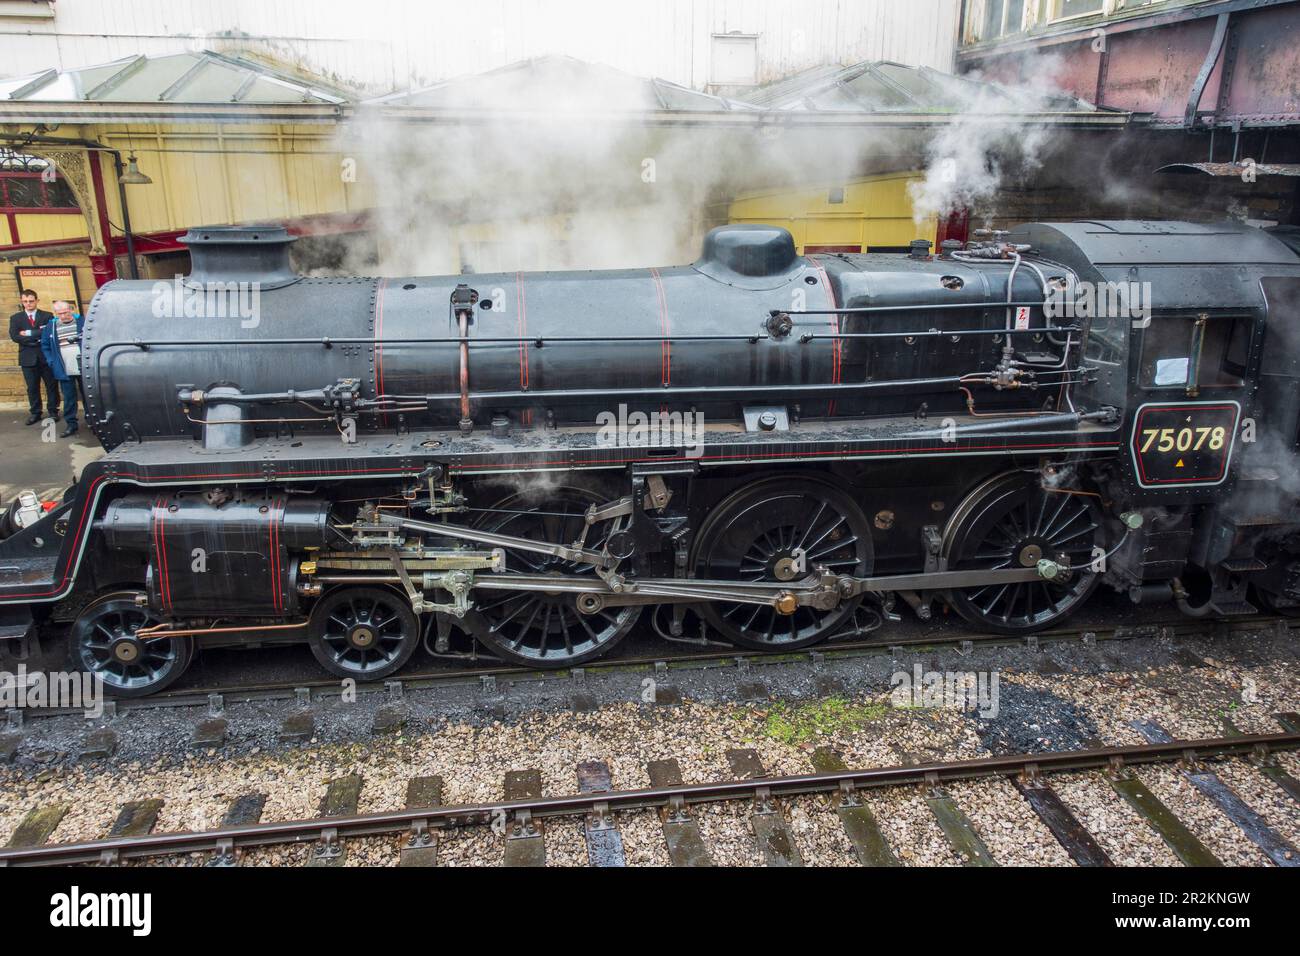 Restored Steam locomotive 75078 on the Keighley & Worth Valley Railway at Keighley Station in West Yorkshire, England, UK Stock Photo